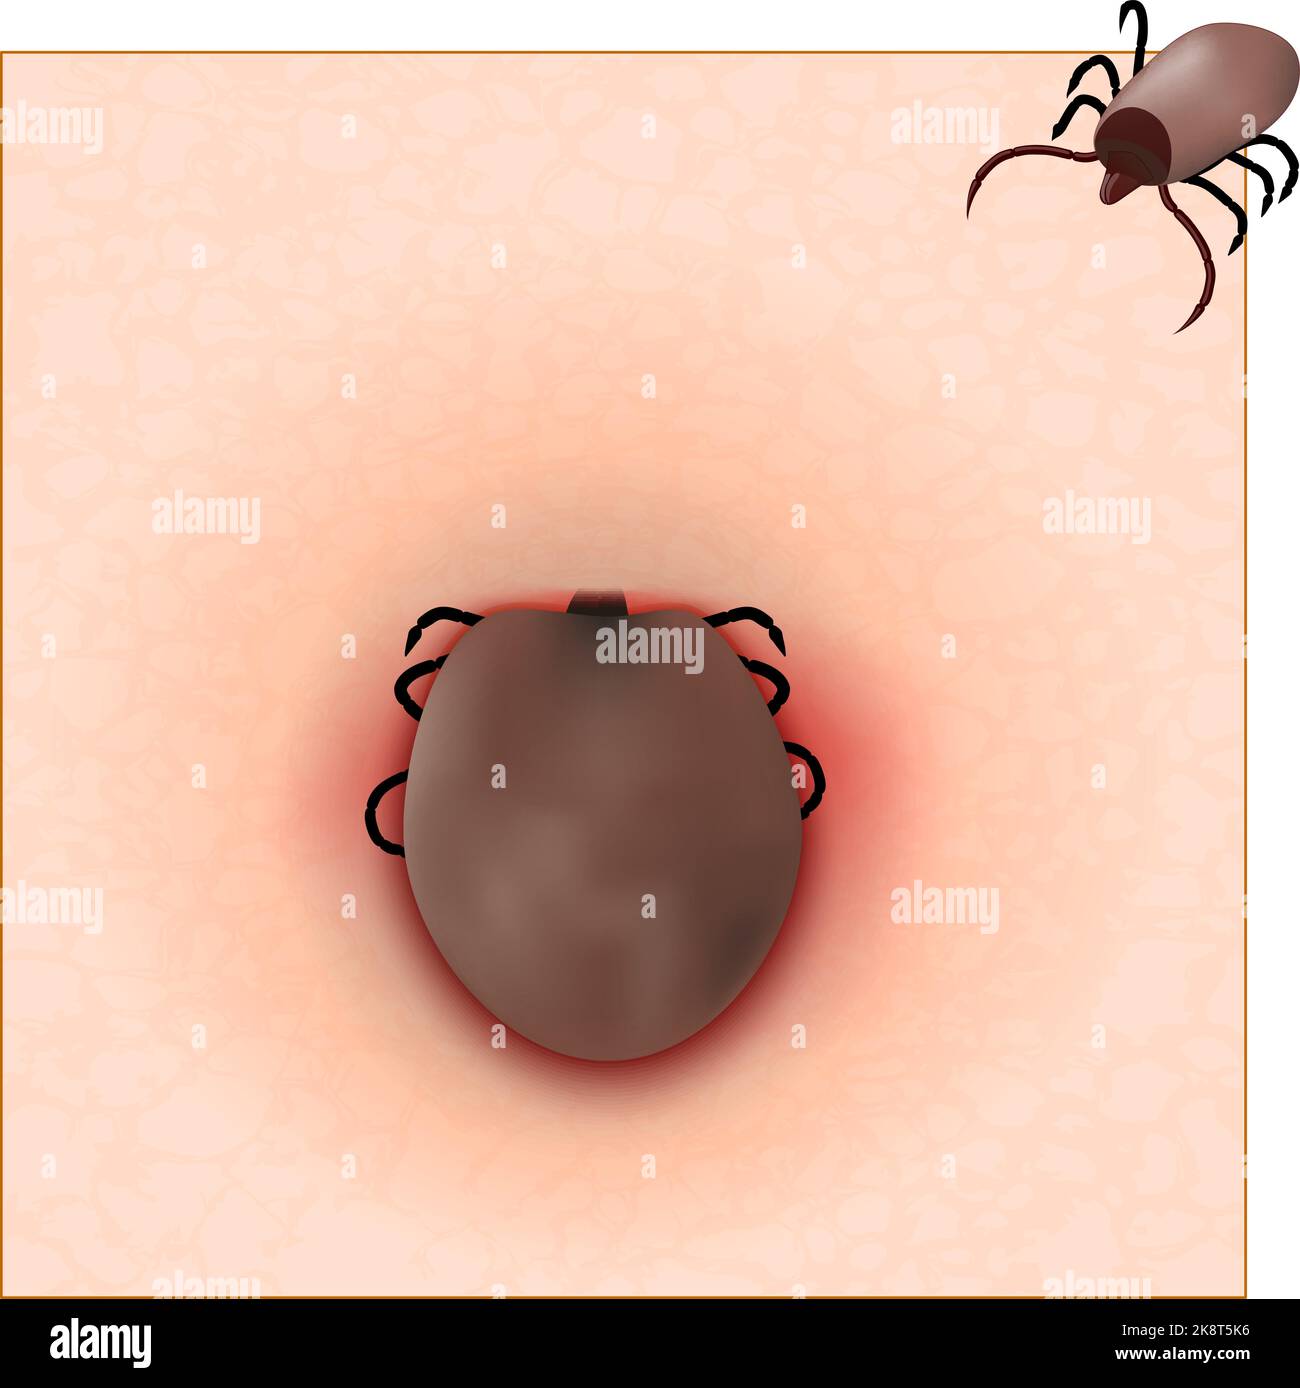 Tick before and after feeding. Tick-borne encephalitis TBE. Mite insect parasites. dangerous insect. Ixodes ricinus on the skin. Vector poster. Stock Vector